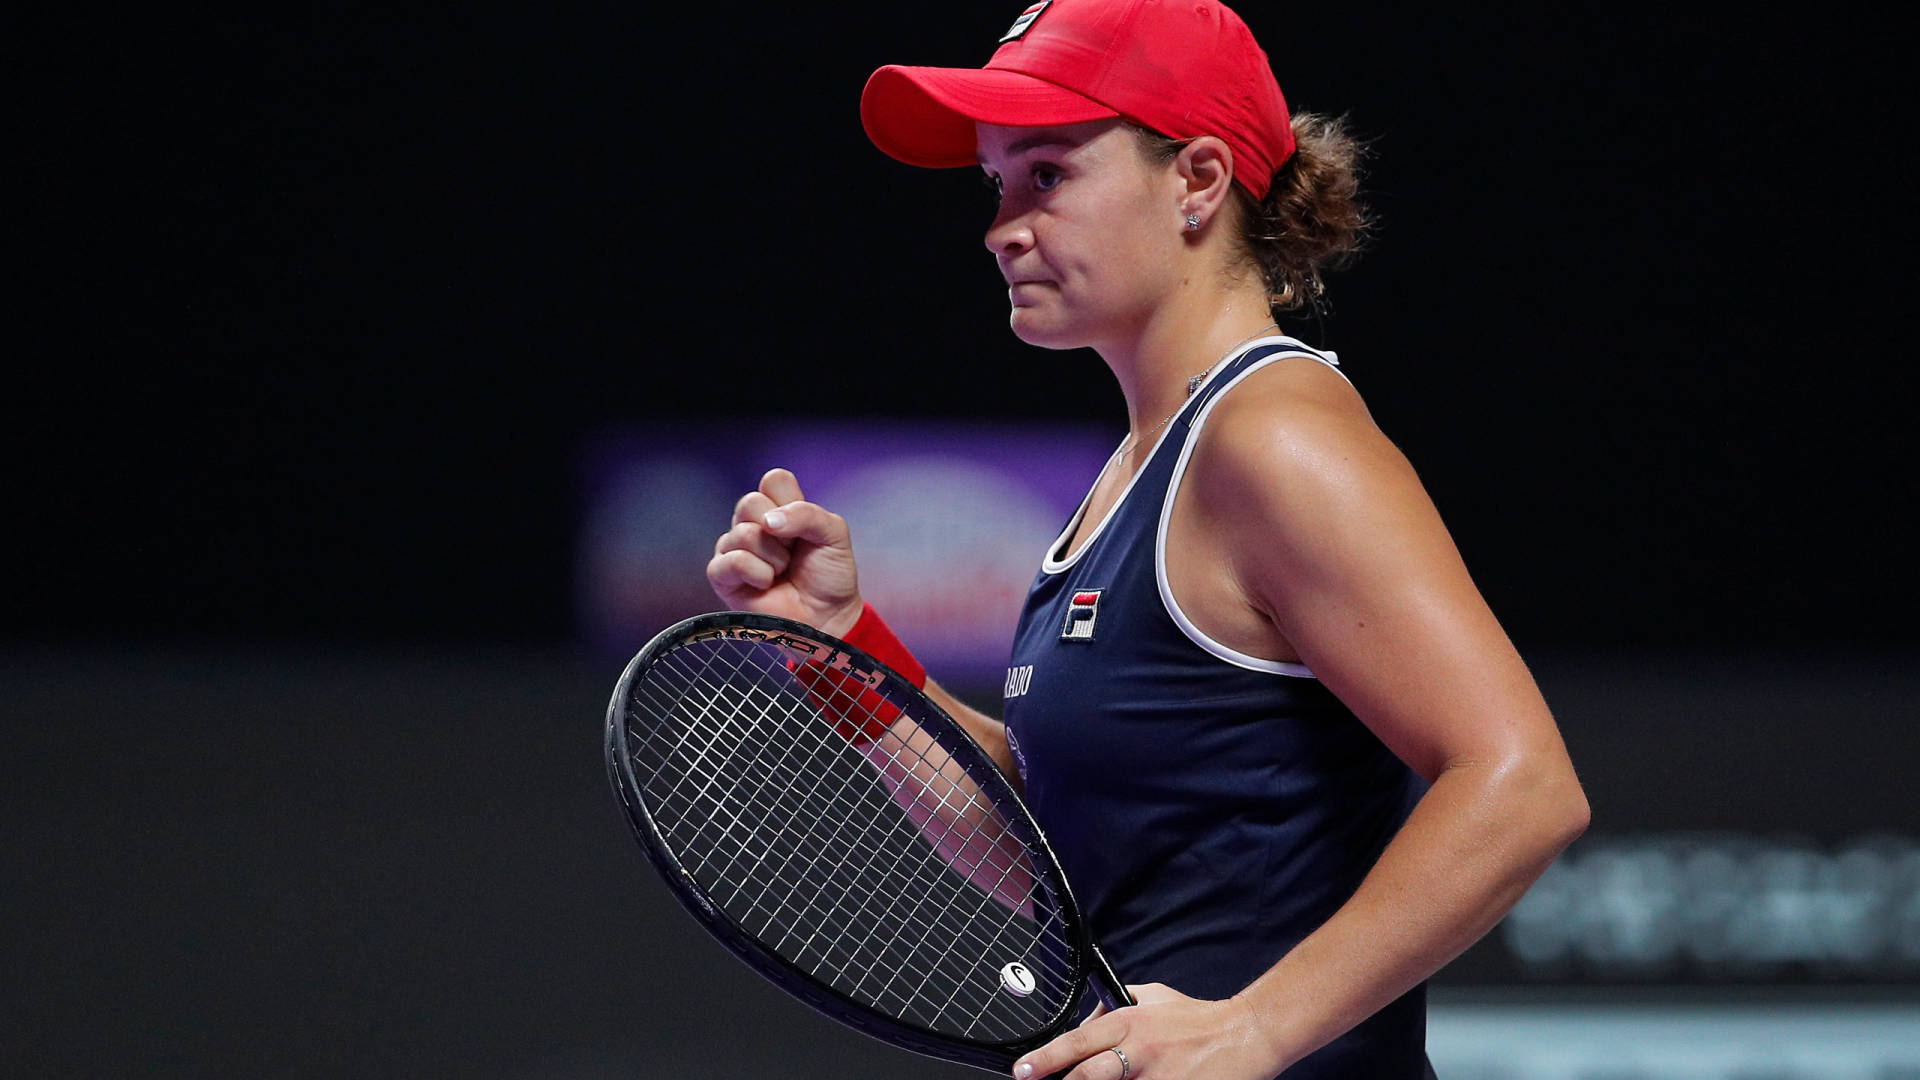 Ashleigh Barty in Red Cap Wallpaper